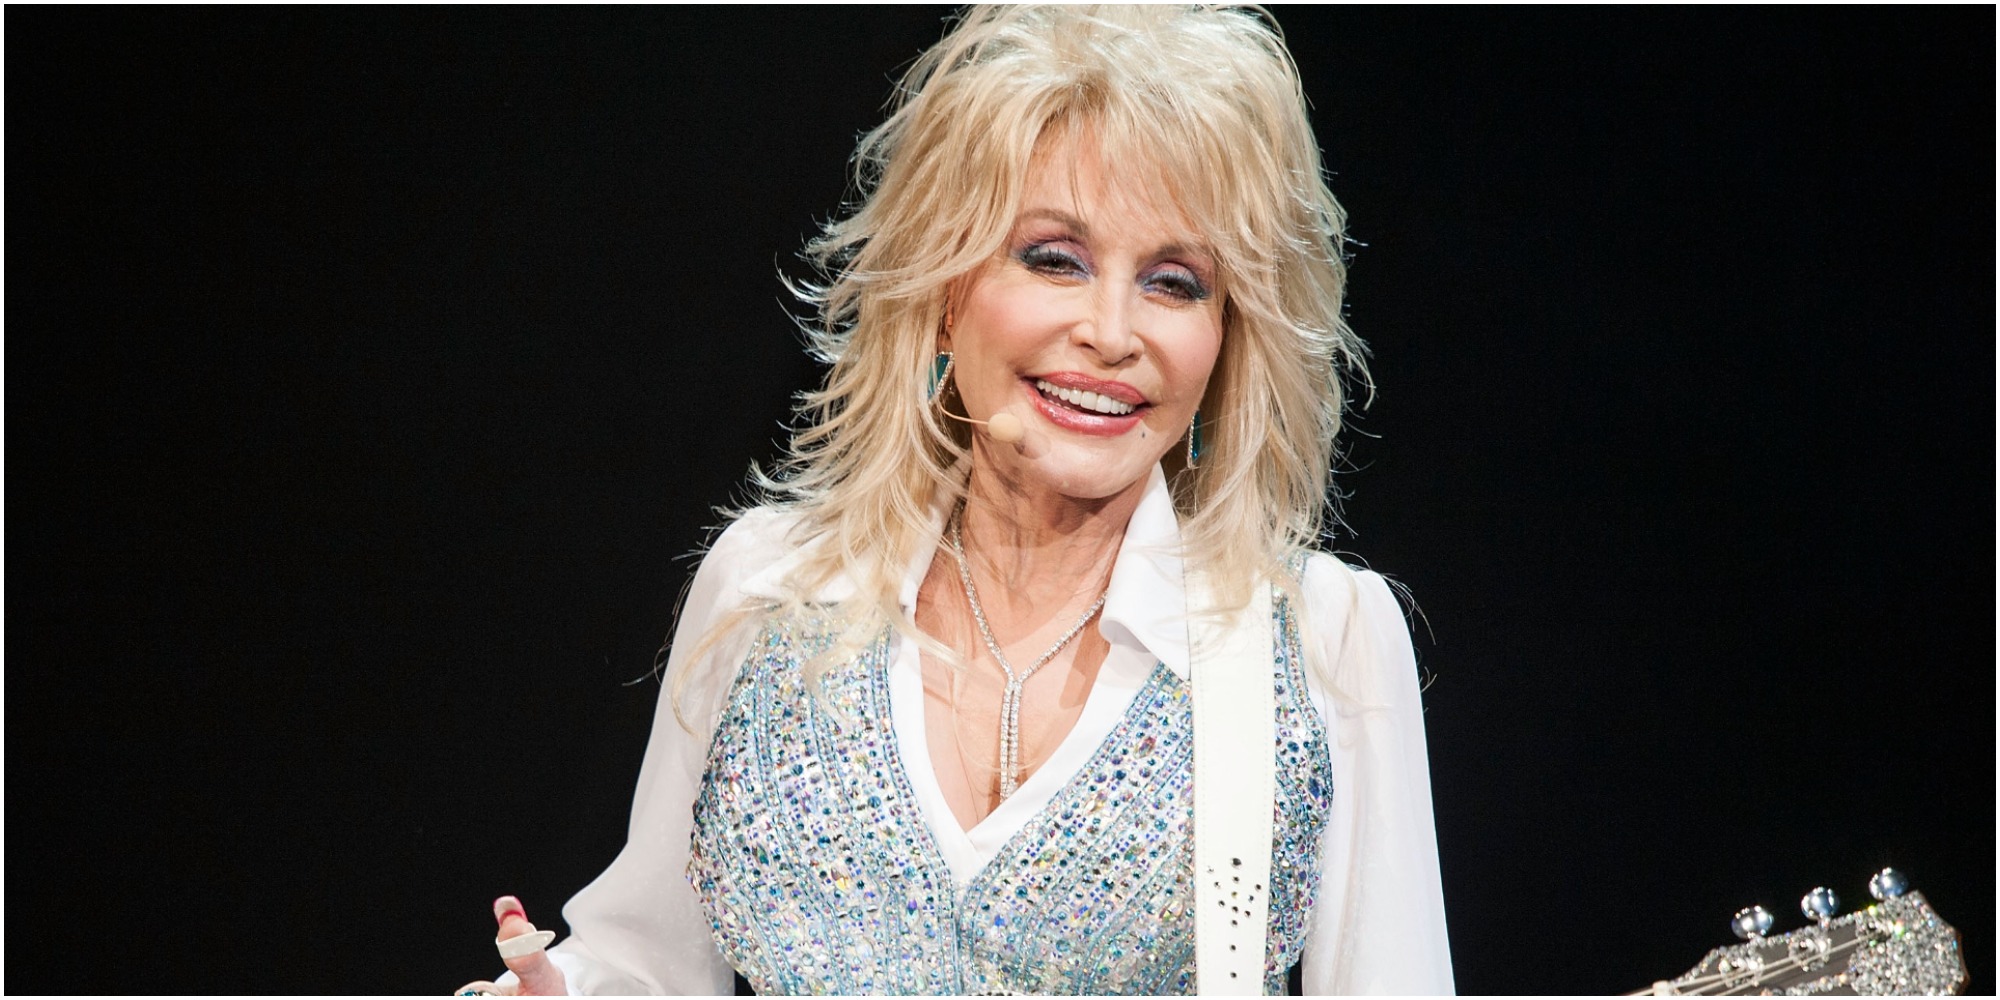 Dolly Parton poses with a guitar.